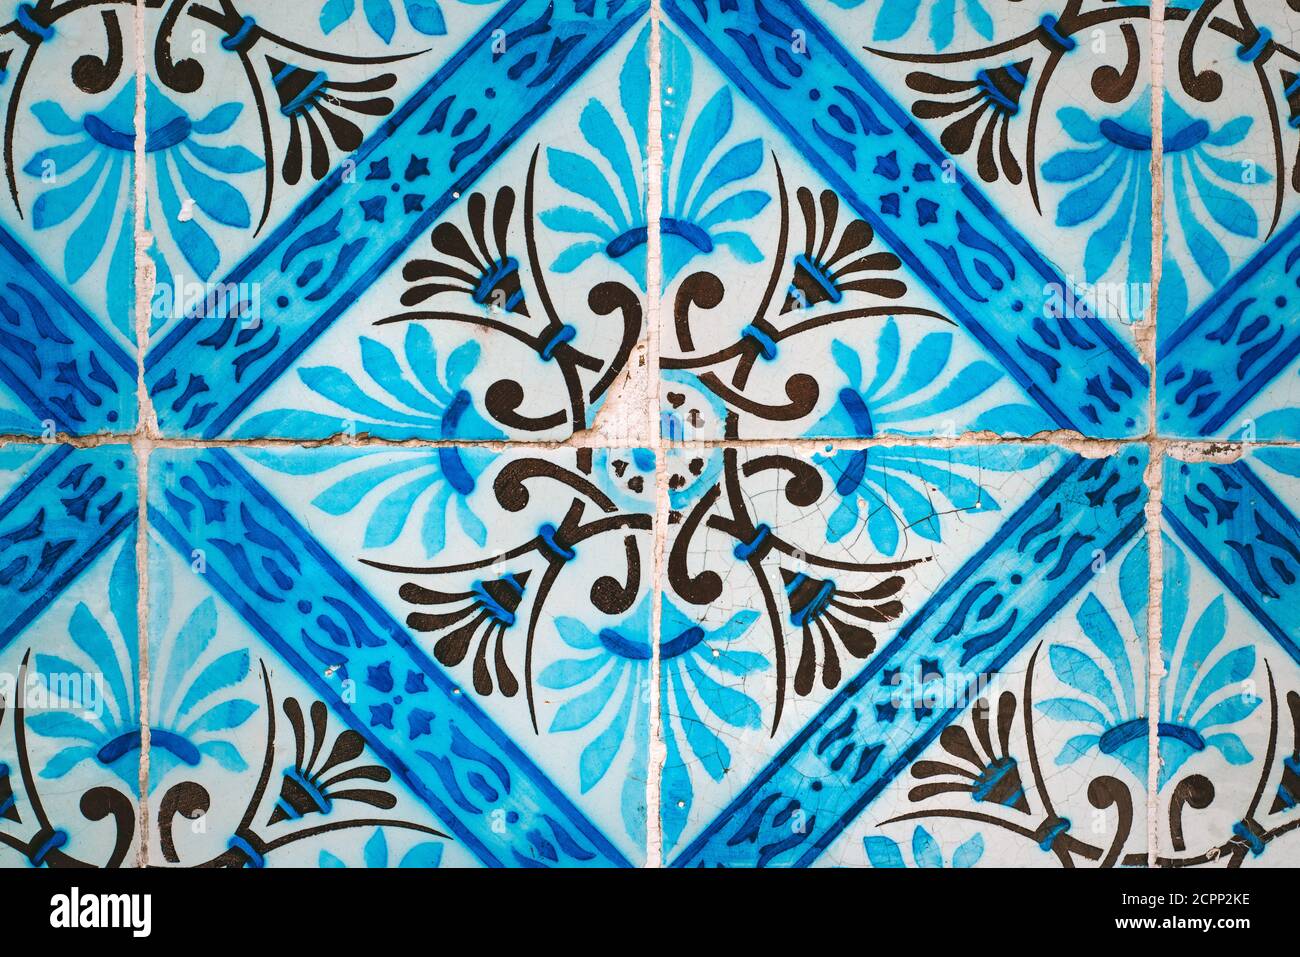 Old broken colourful vintage ceramic tiles wall background from Portugal. Blue, white and black pattern. Stock Photo